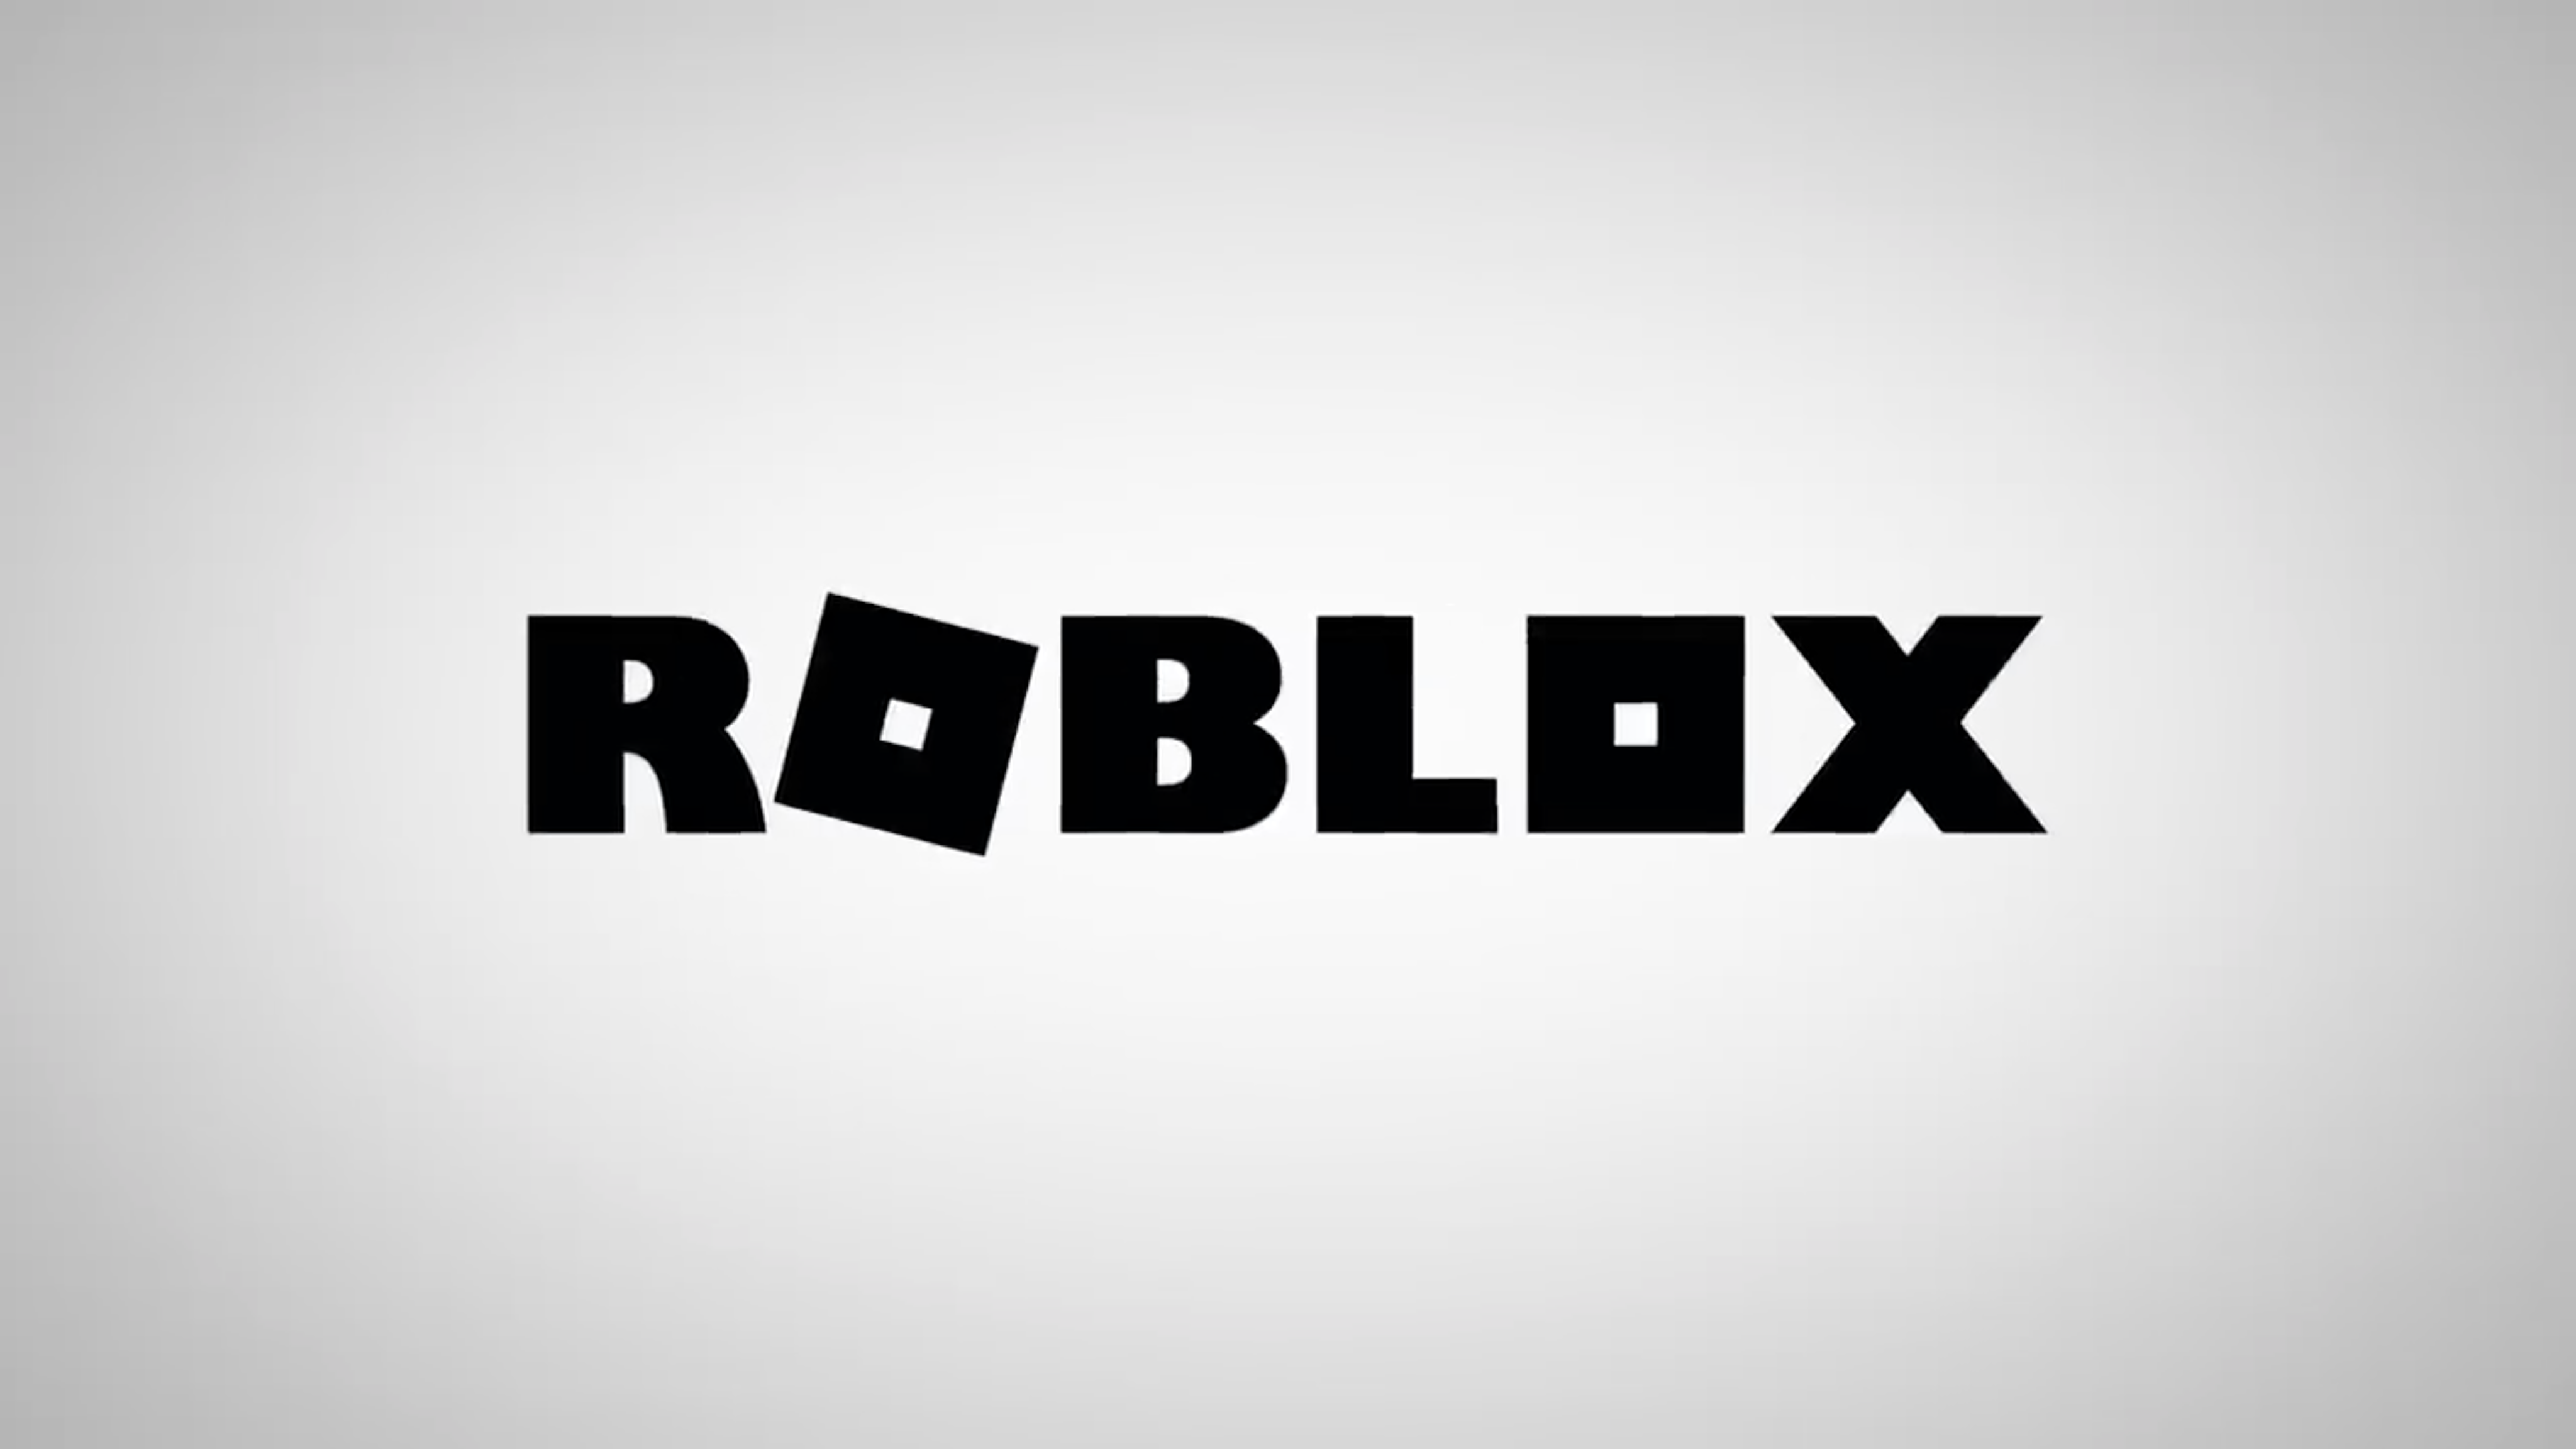 Roblox::Appstore for Android